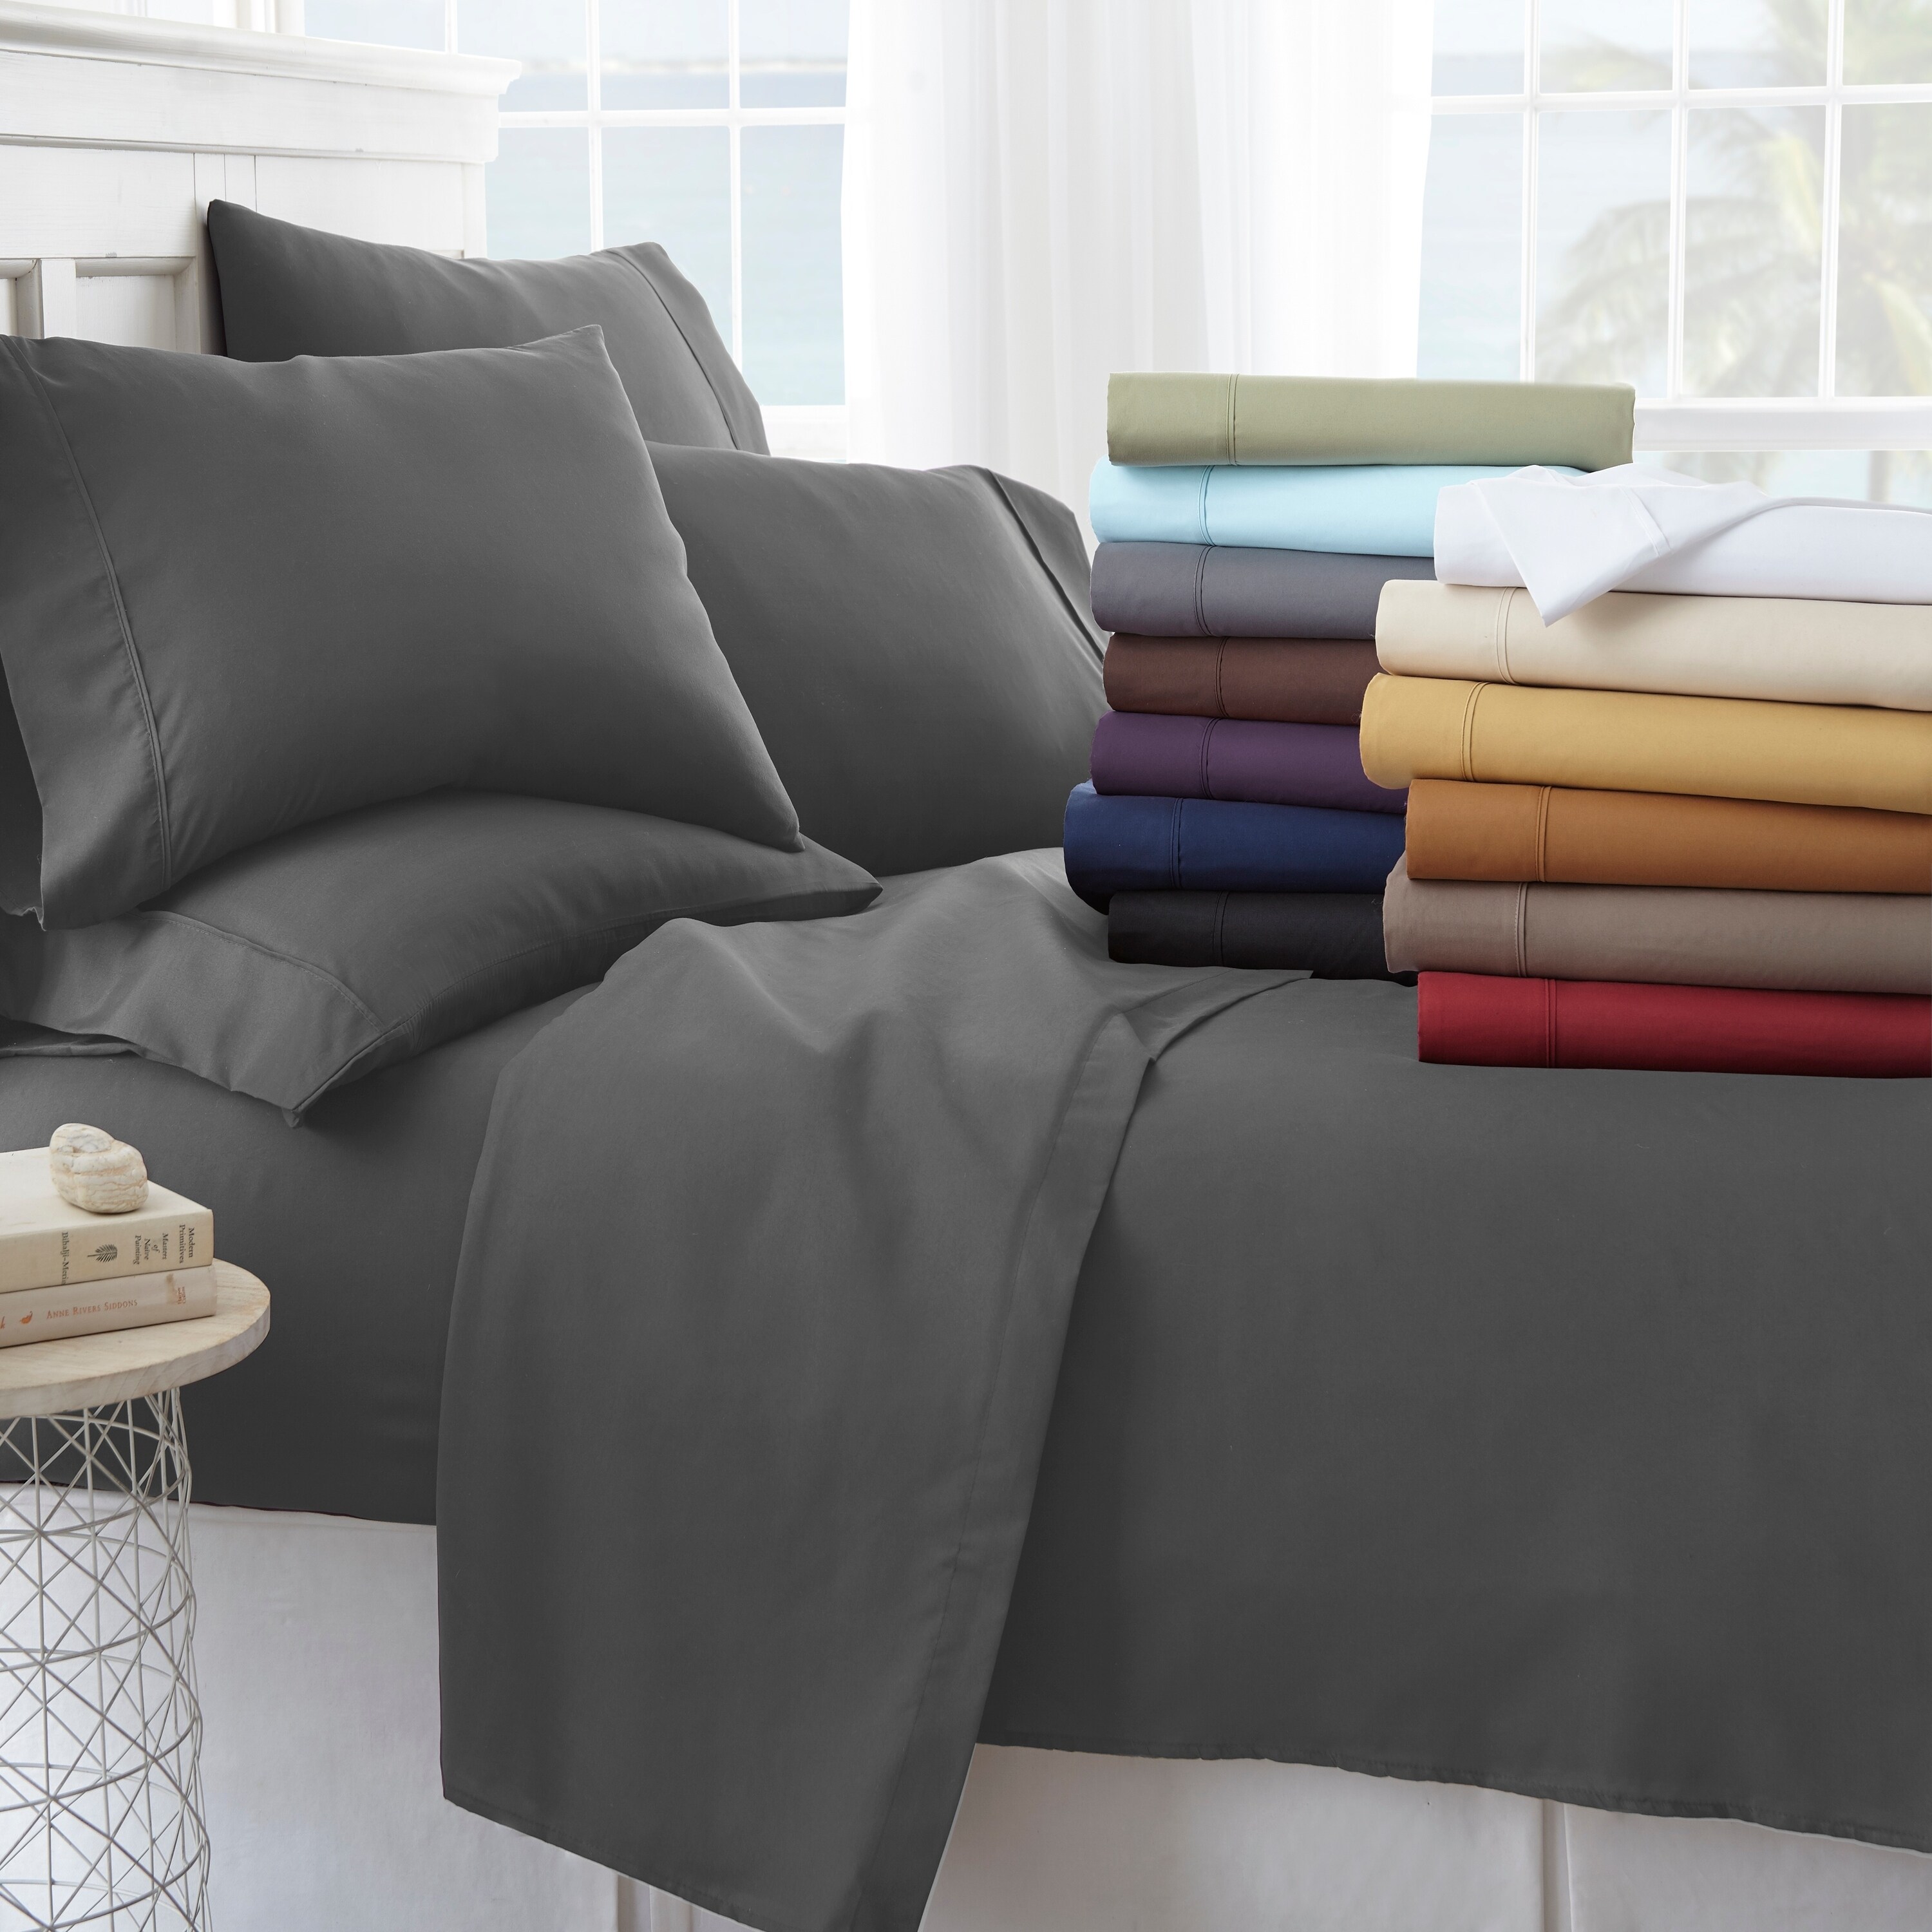 Simply Soft Premium Luxury 6 Piece Bed Sheet Set - image 3 of 5